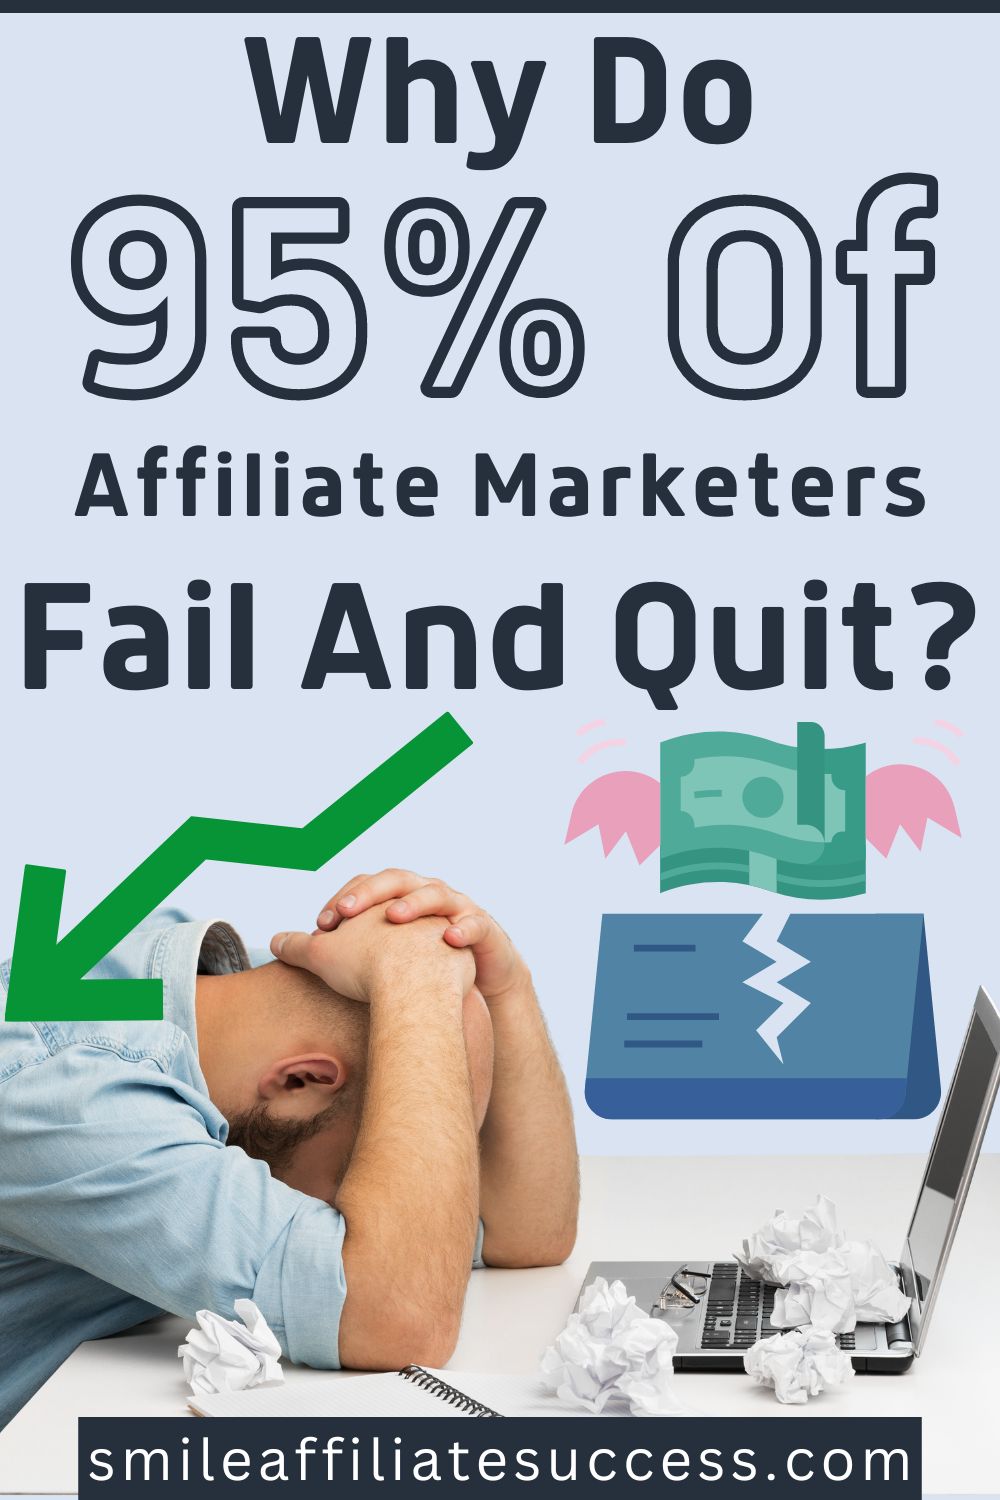 Why Do 95% Of Affiliate Marketers Fail And Quit?